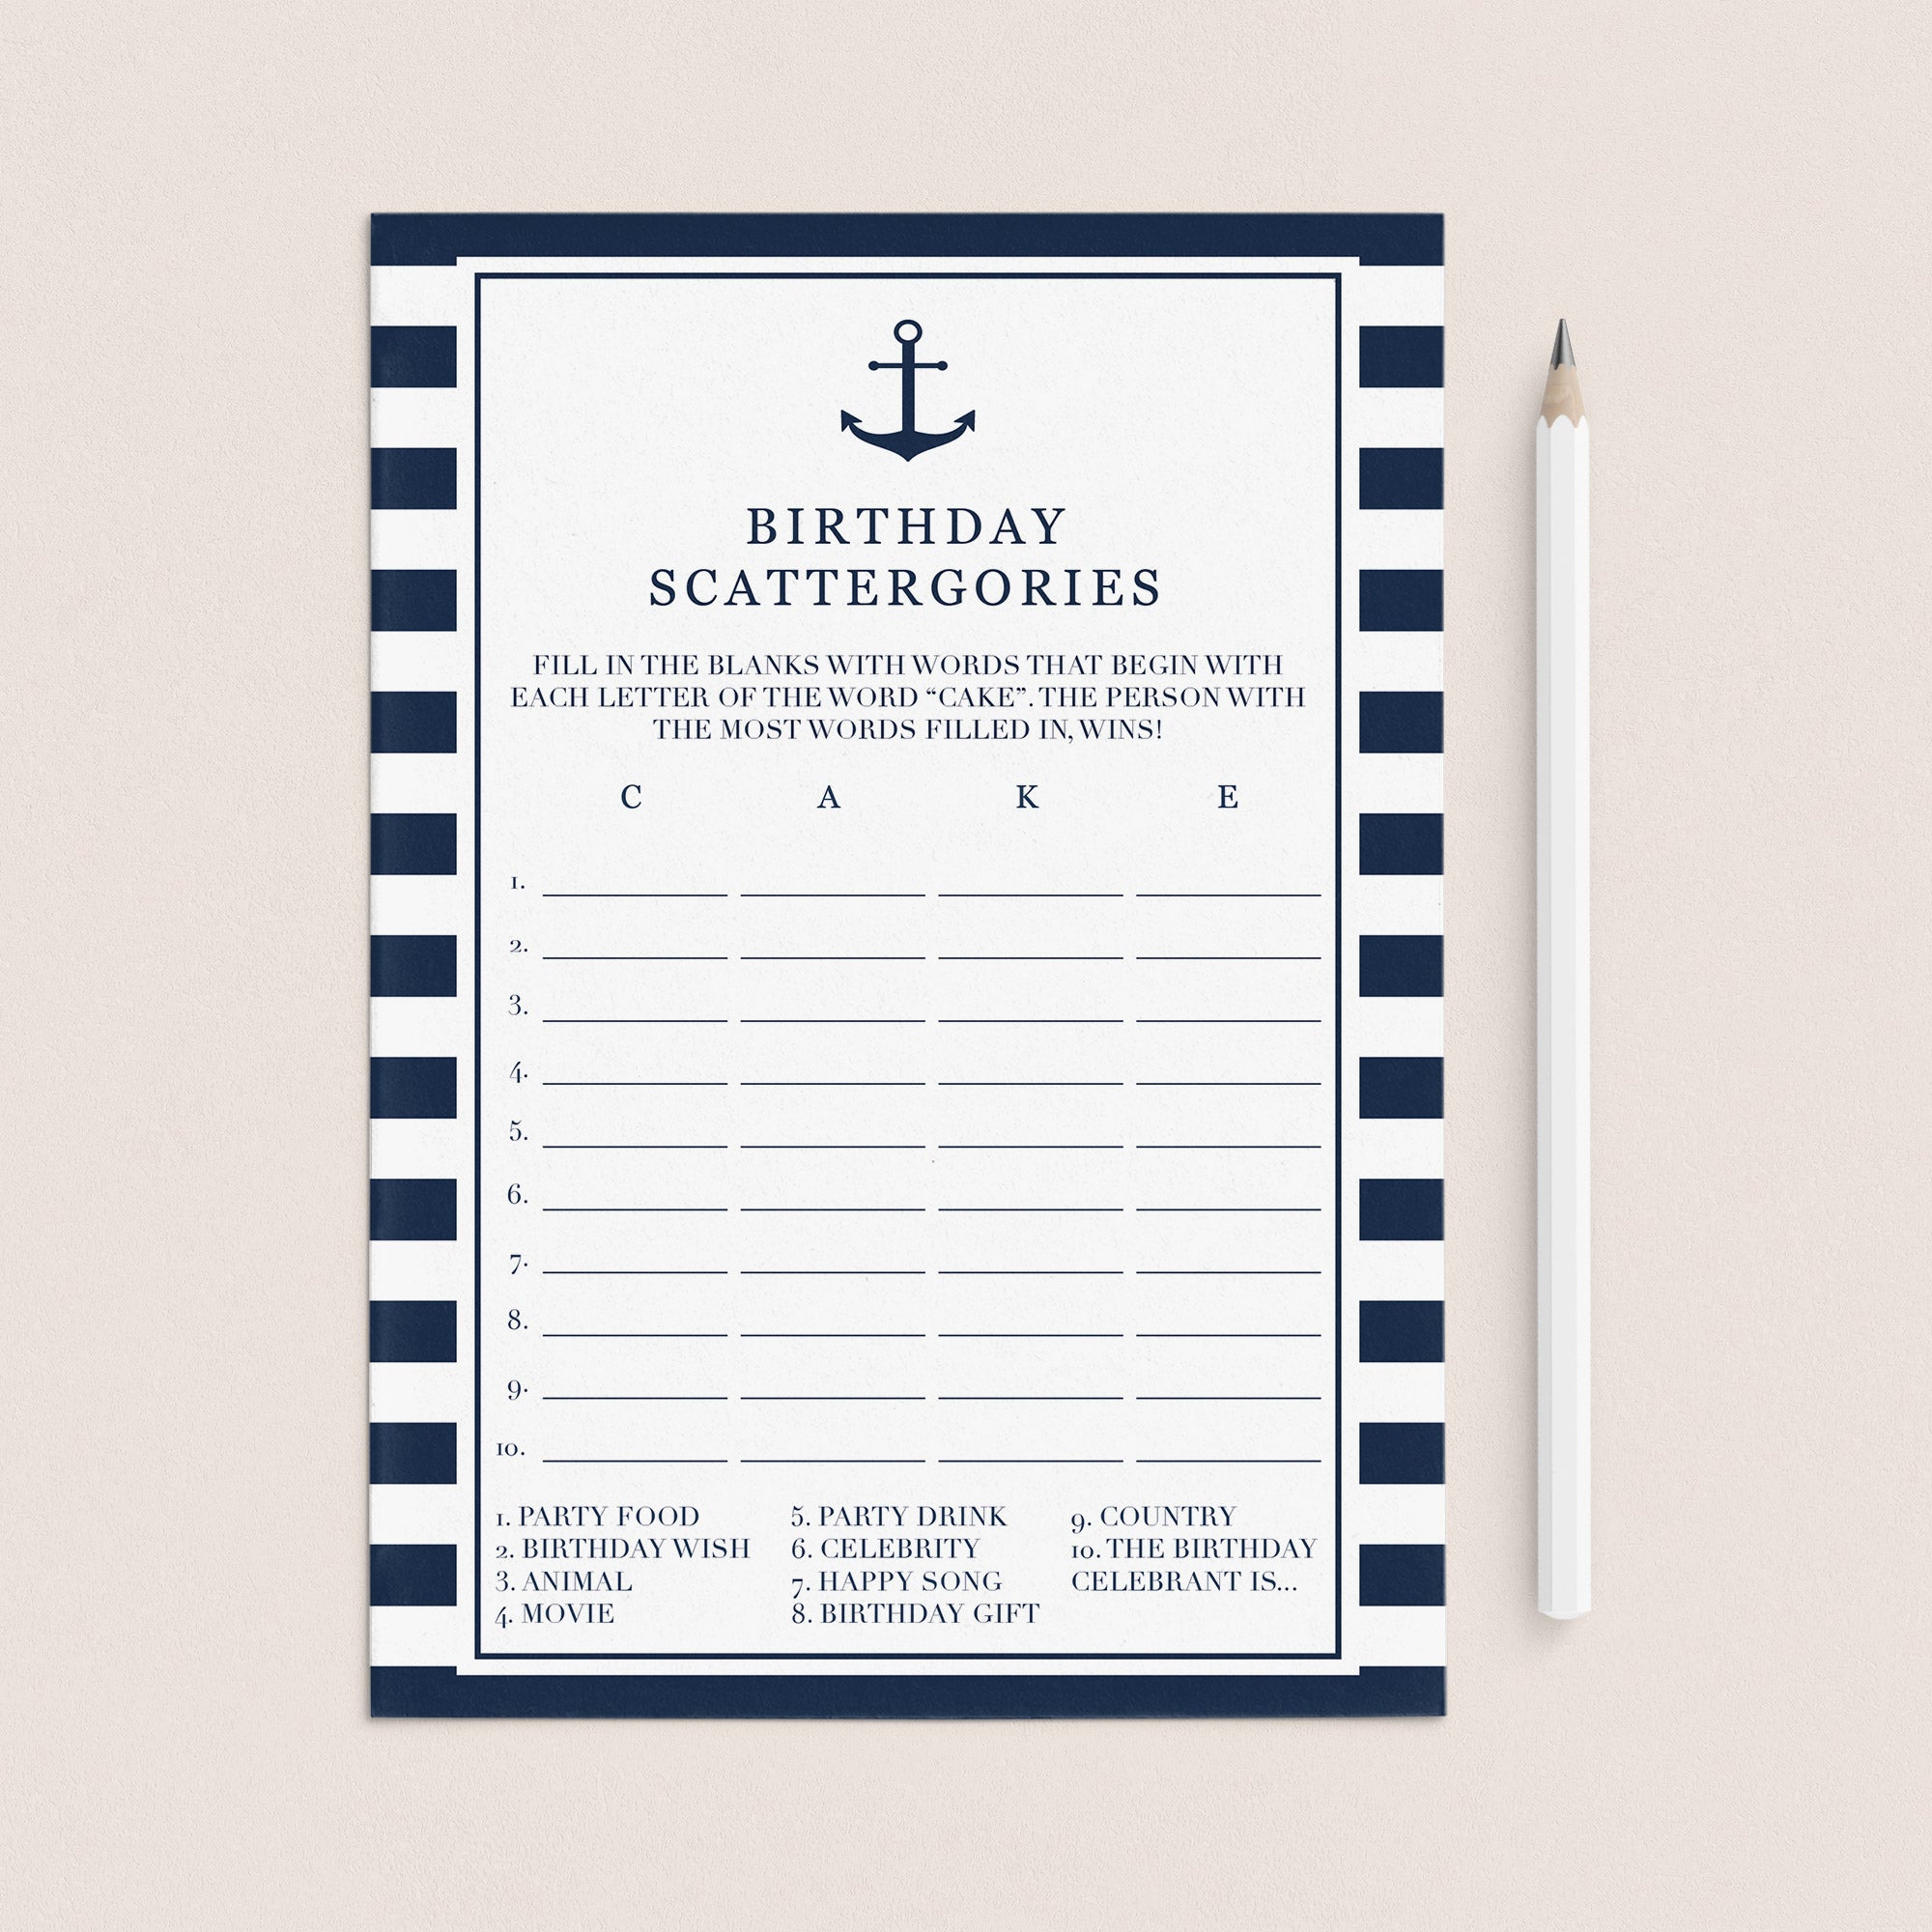 Birthday Party Scattergories for Men Printable by LittleSizzle